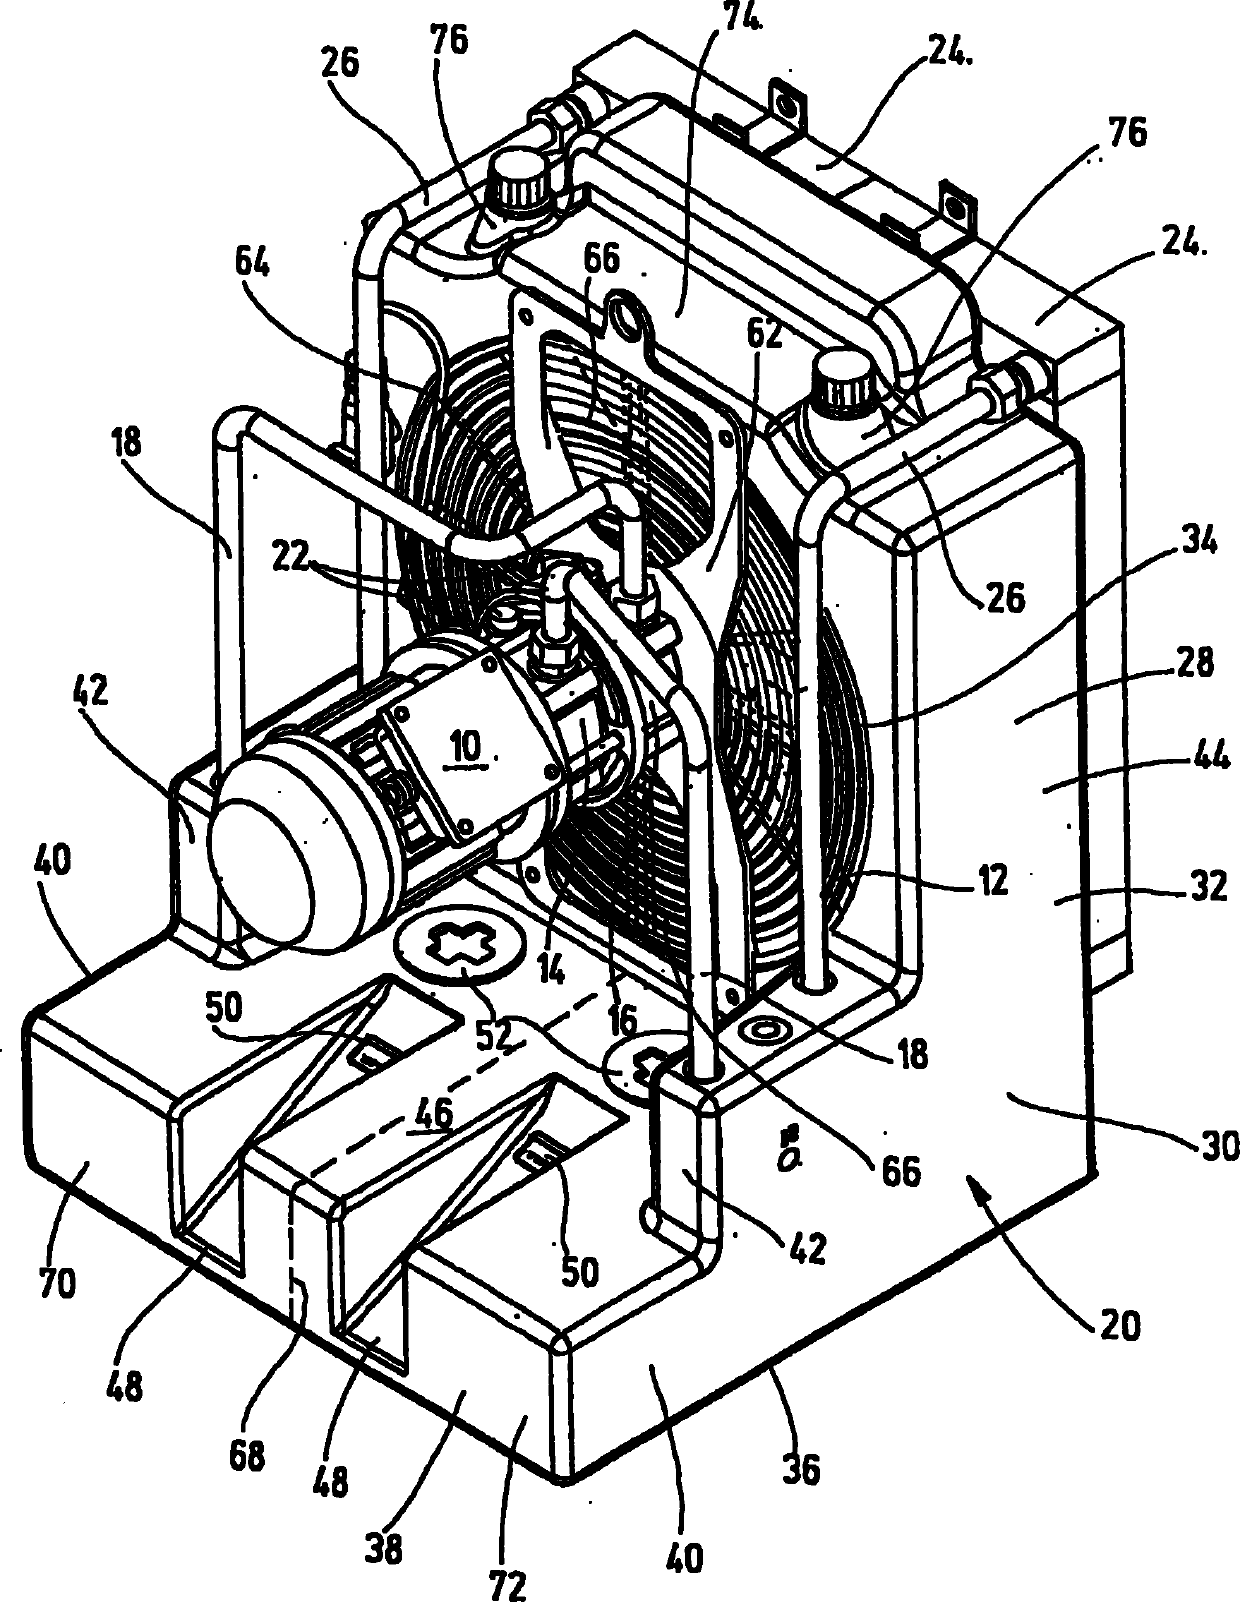 Fluid cooling device